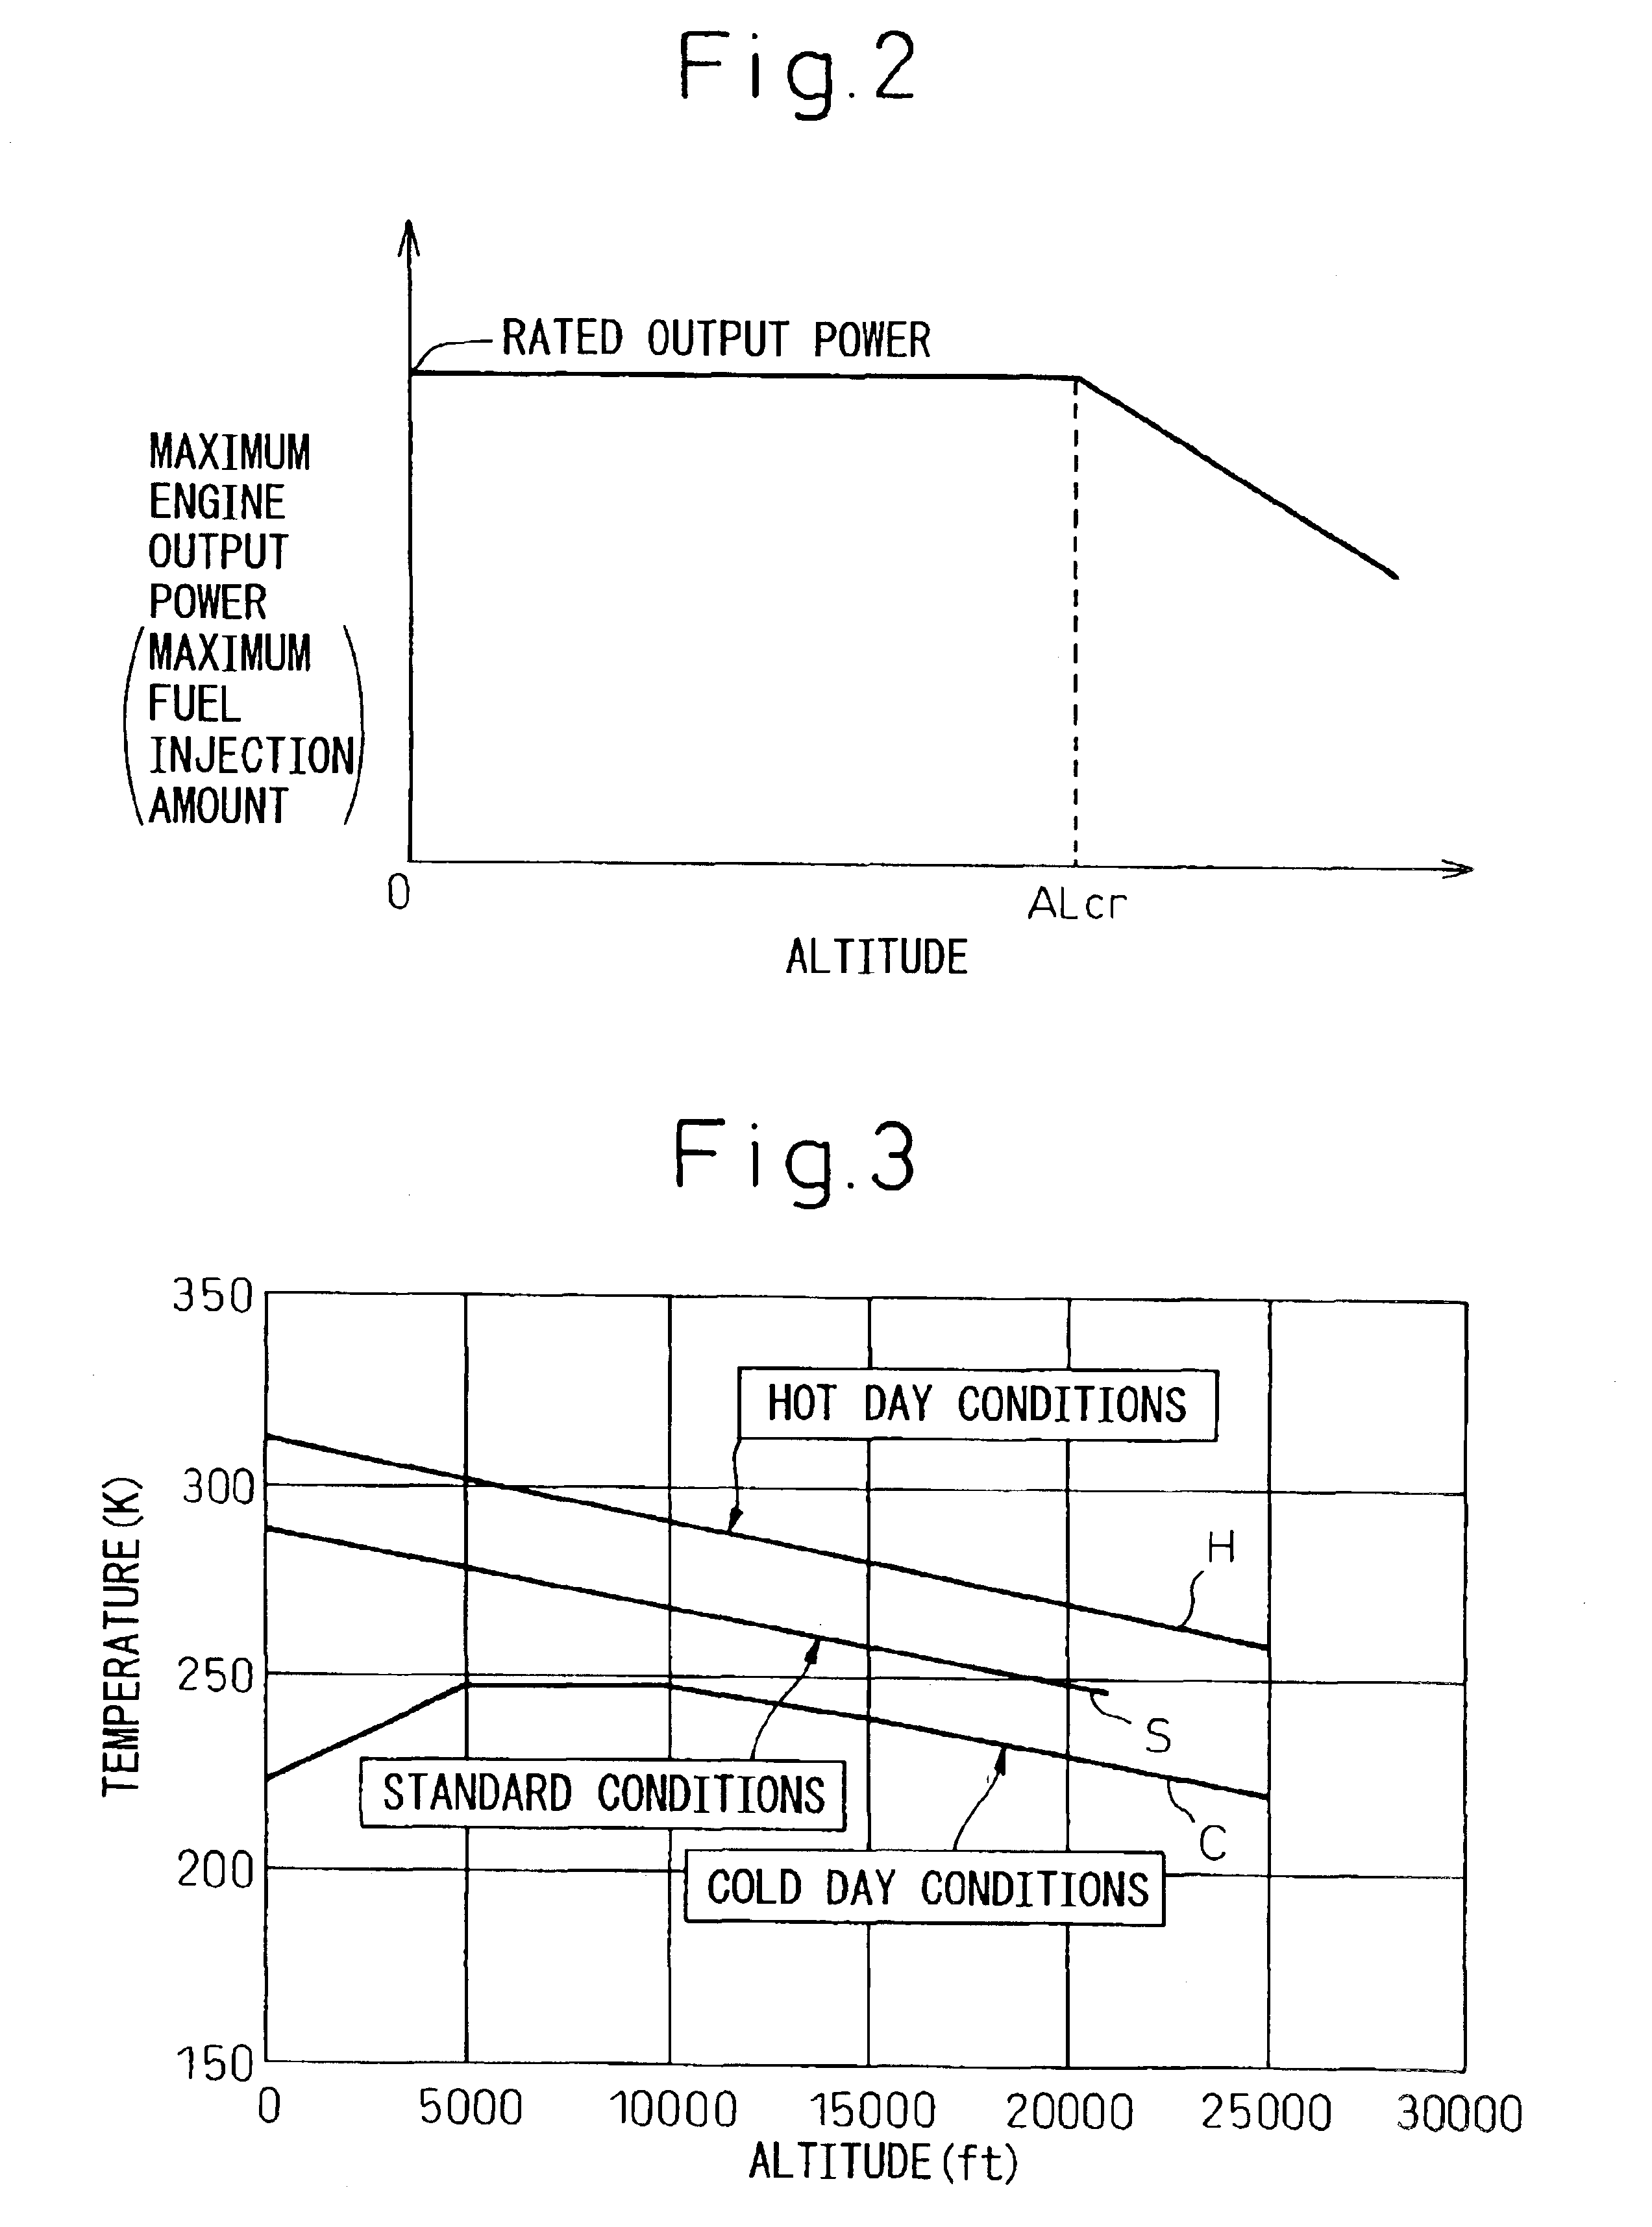 Fuel supply control device for a turbo-charged diesel aircraft engine